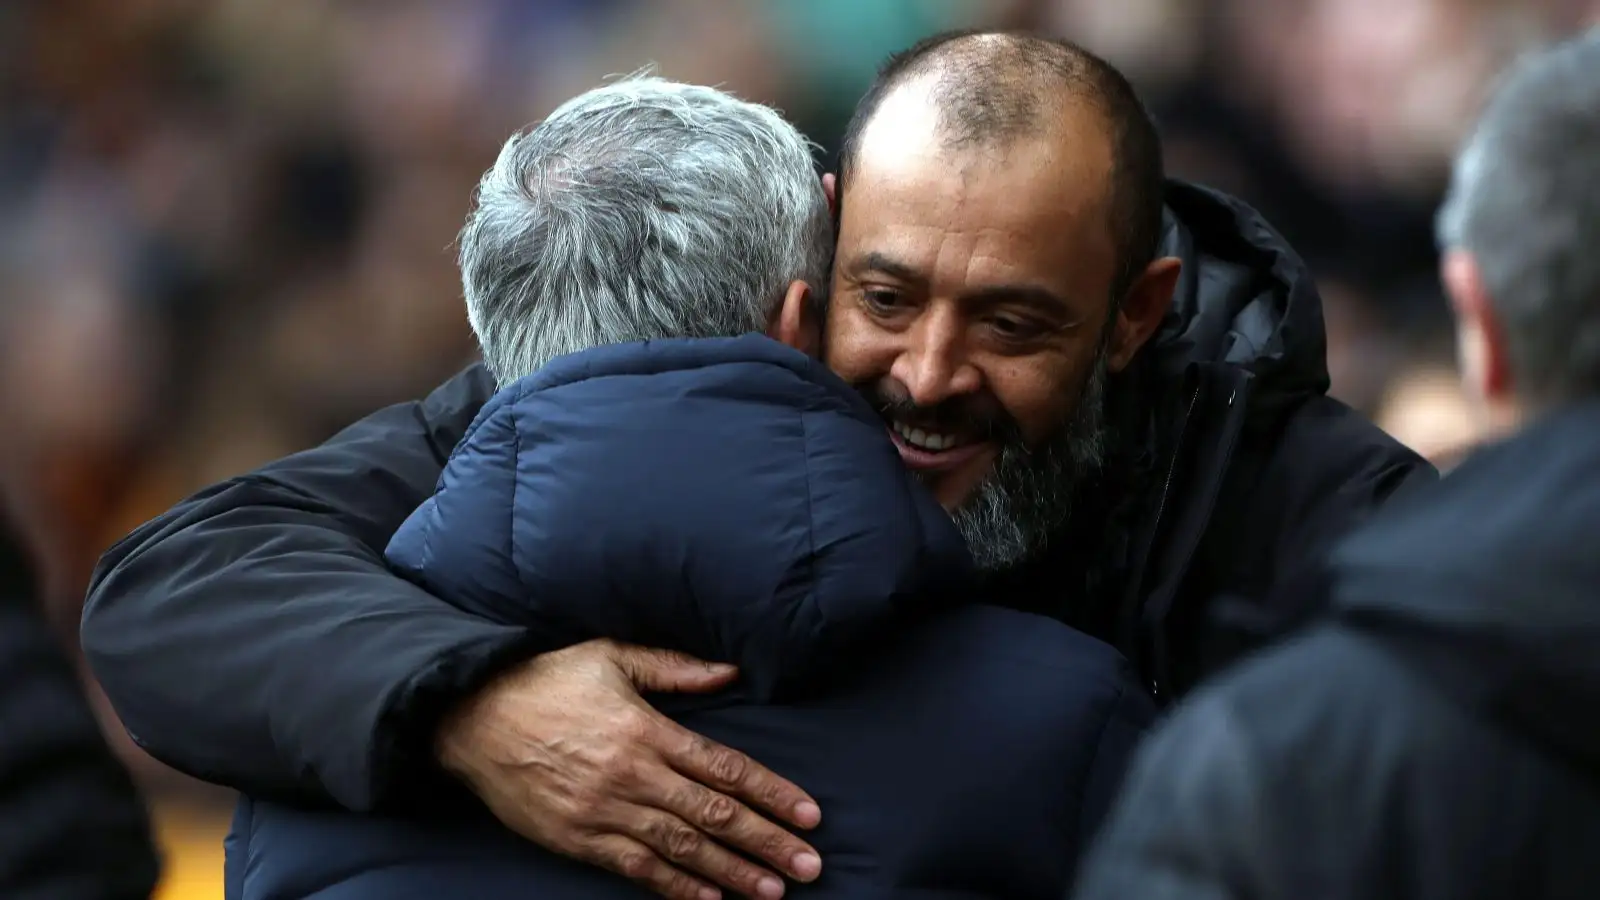 Nottingham Forest-attached company Nuno Espirito Santo hugs Jose Mourinho in days gone by a match.